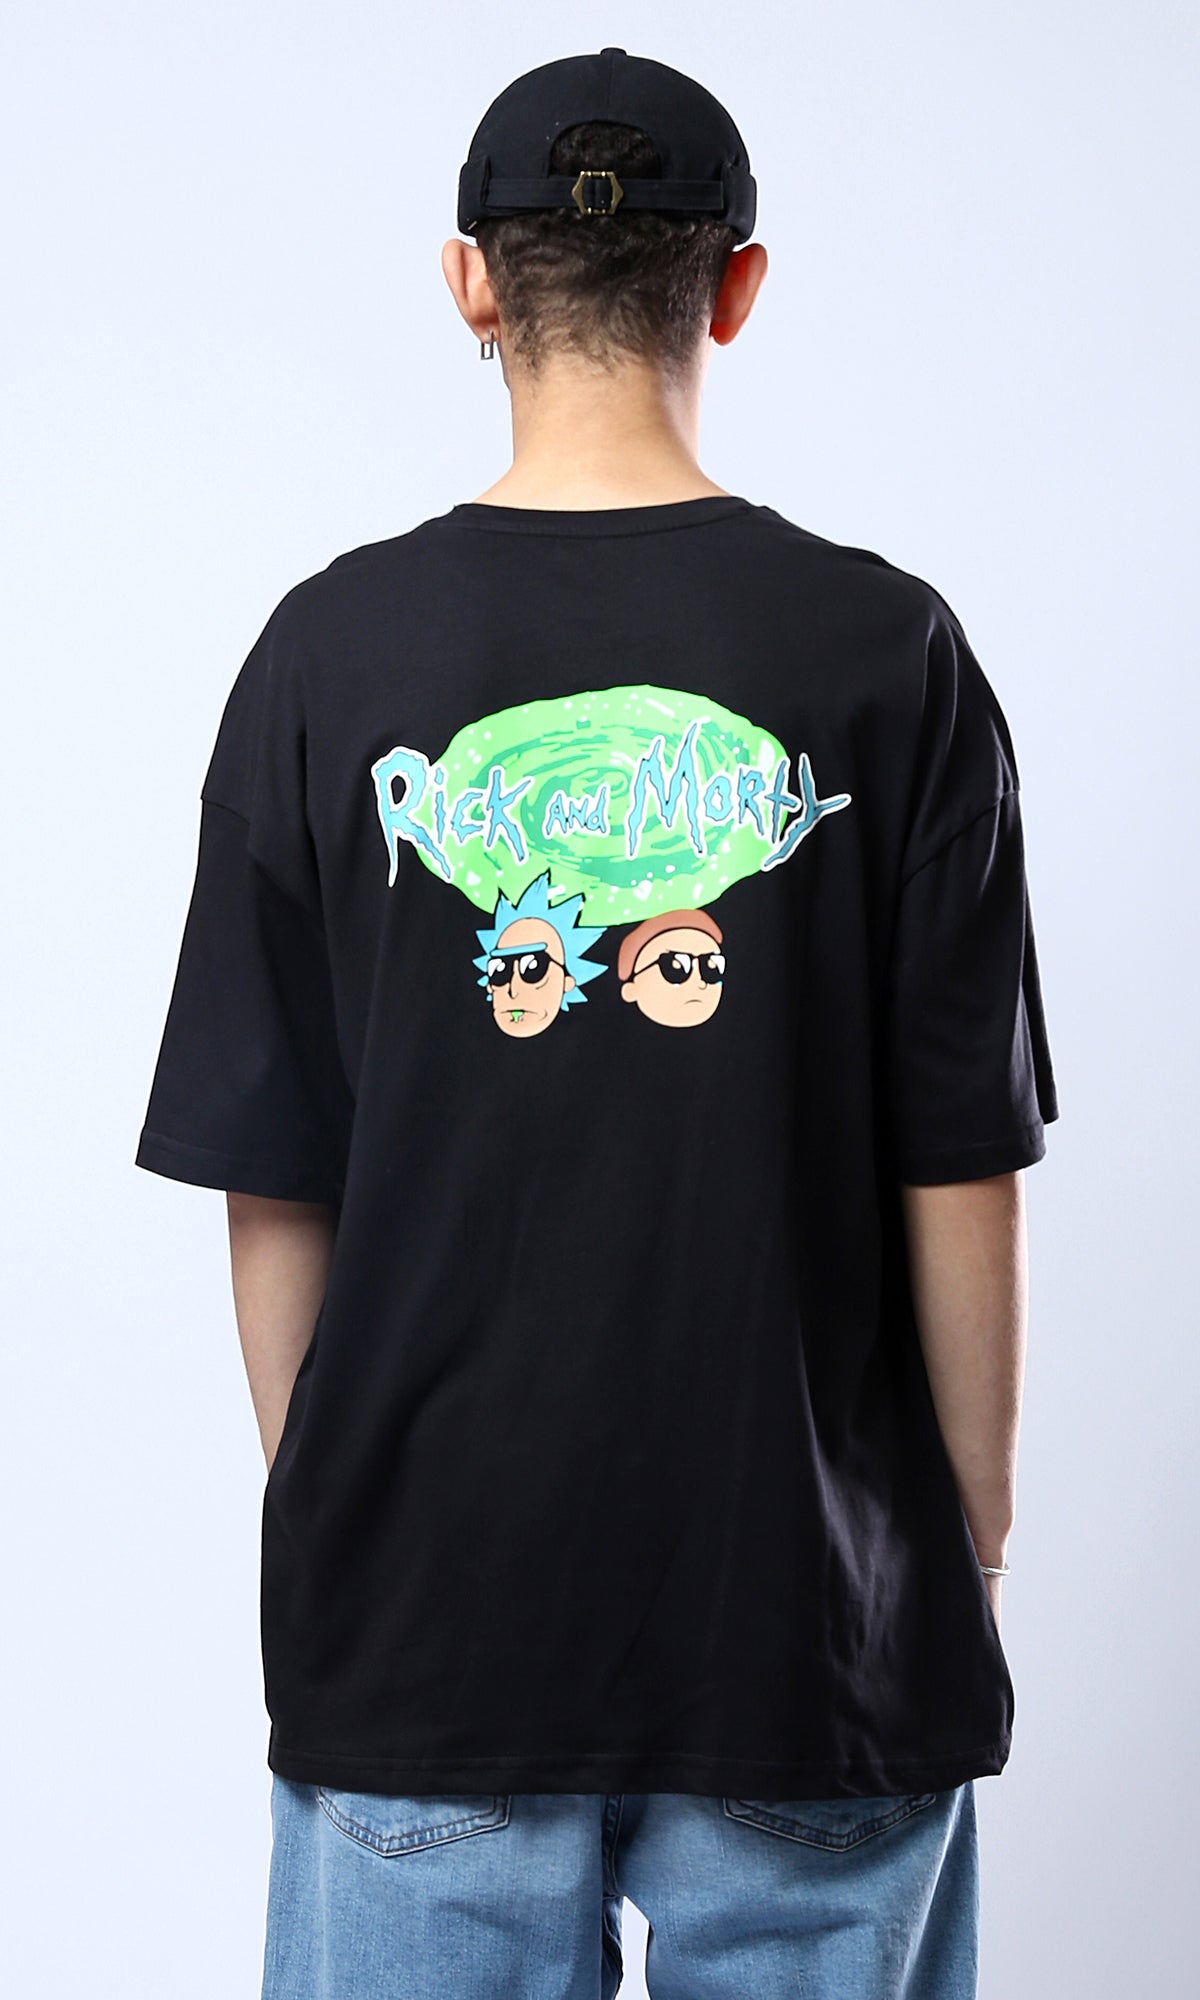 O178402 Black Printed "Rick And Morty" Relaxed Fit Tee